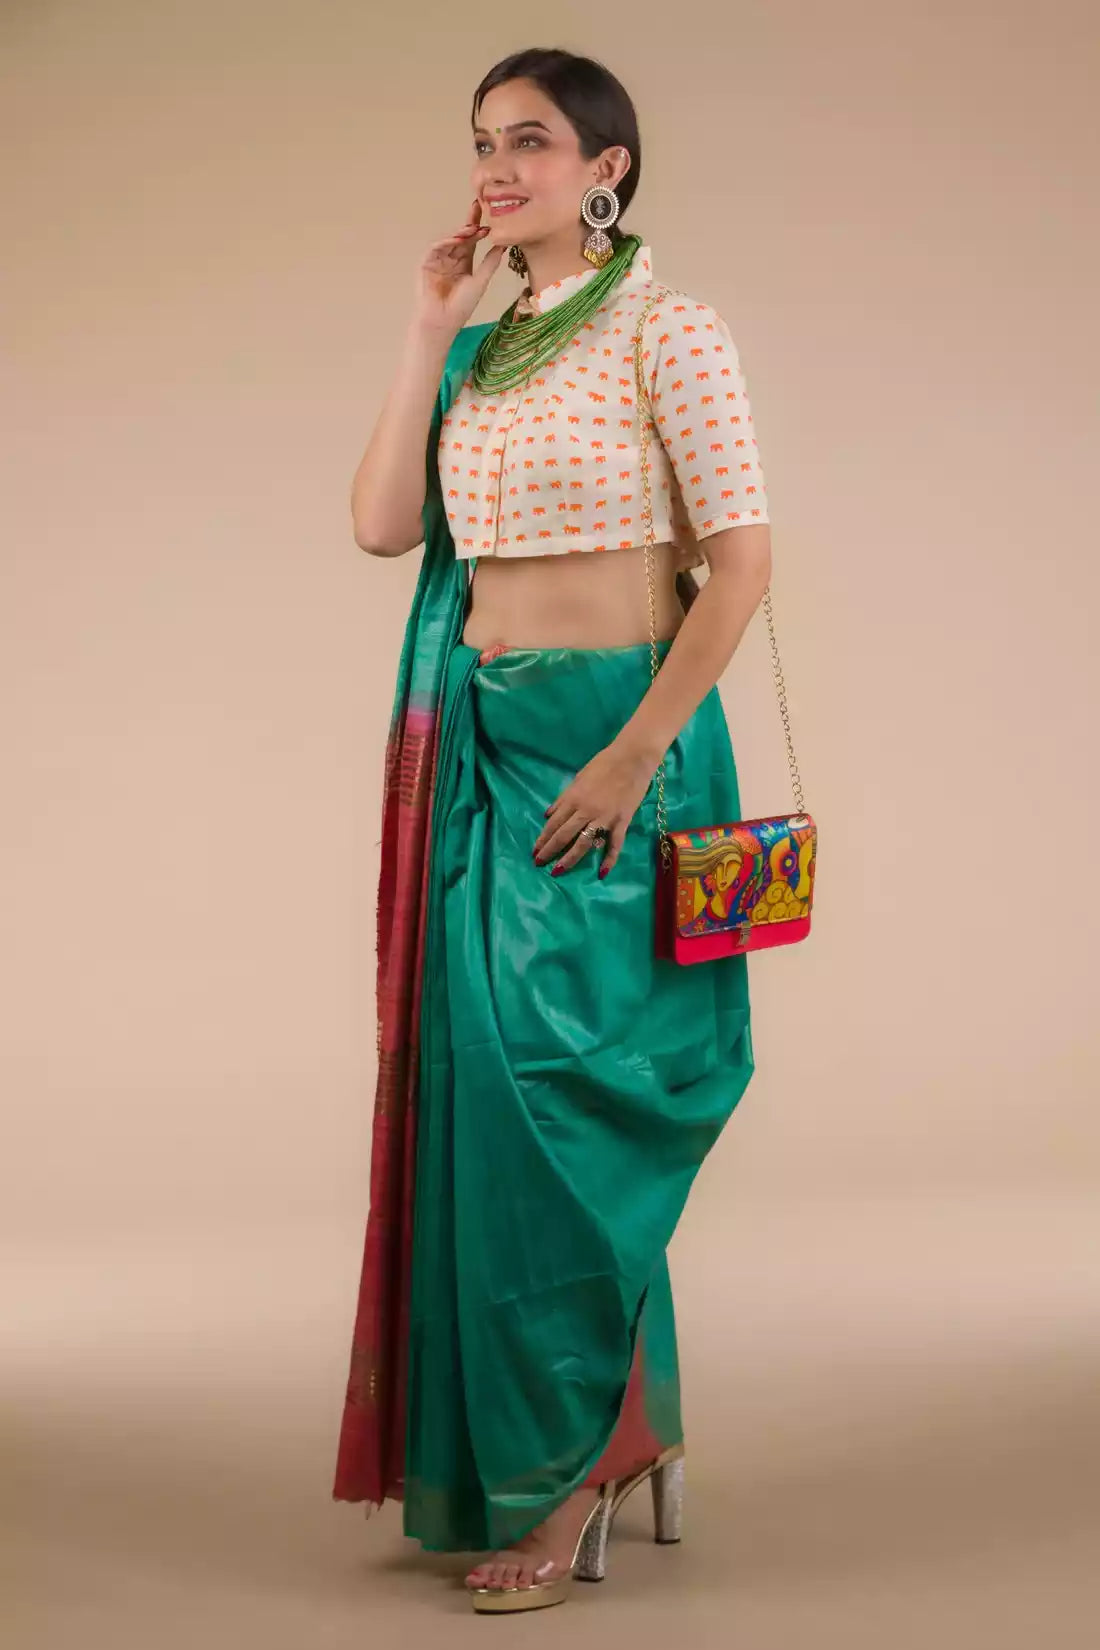 A lady in Sea Green and Red Border Plain In Pure Tussar with Ghicha Border Saree standing against a beige background